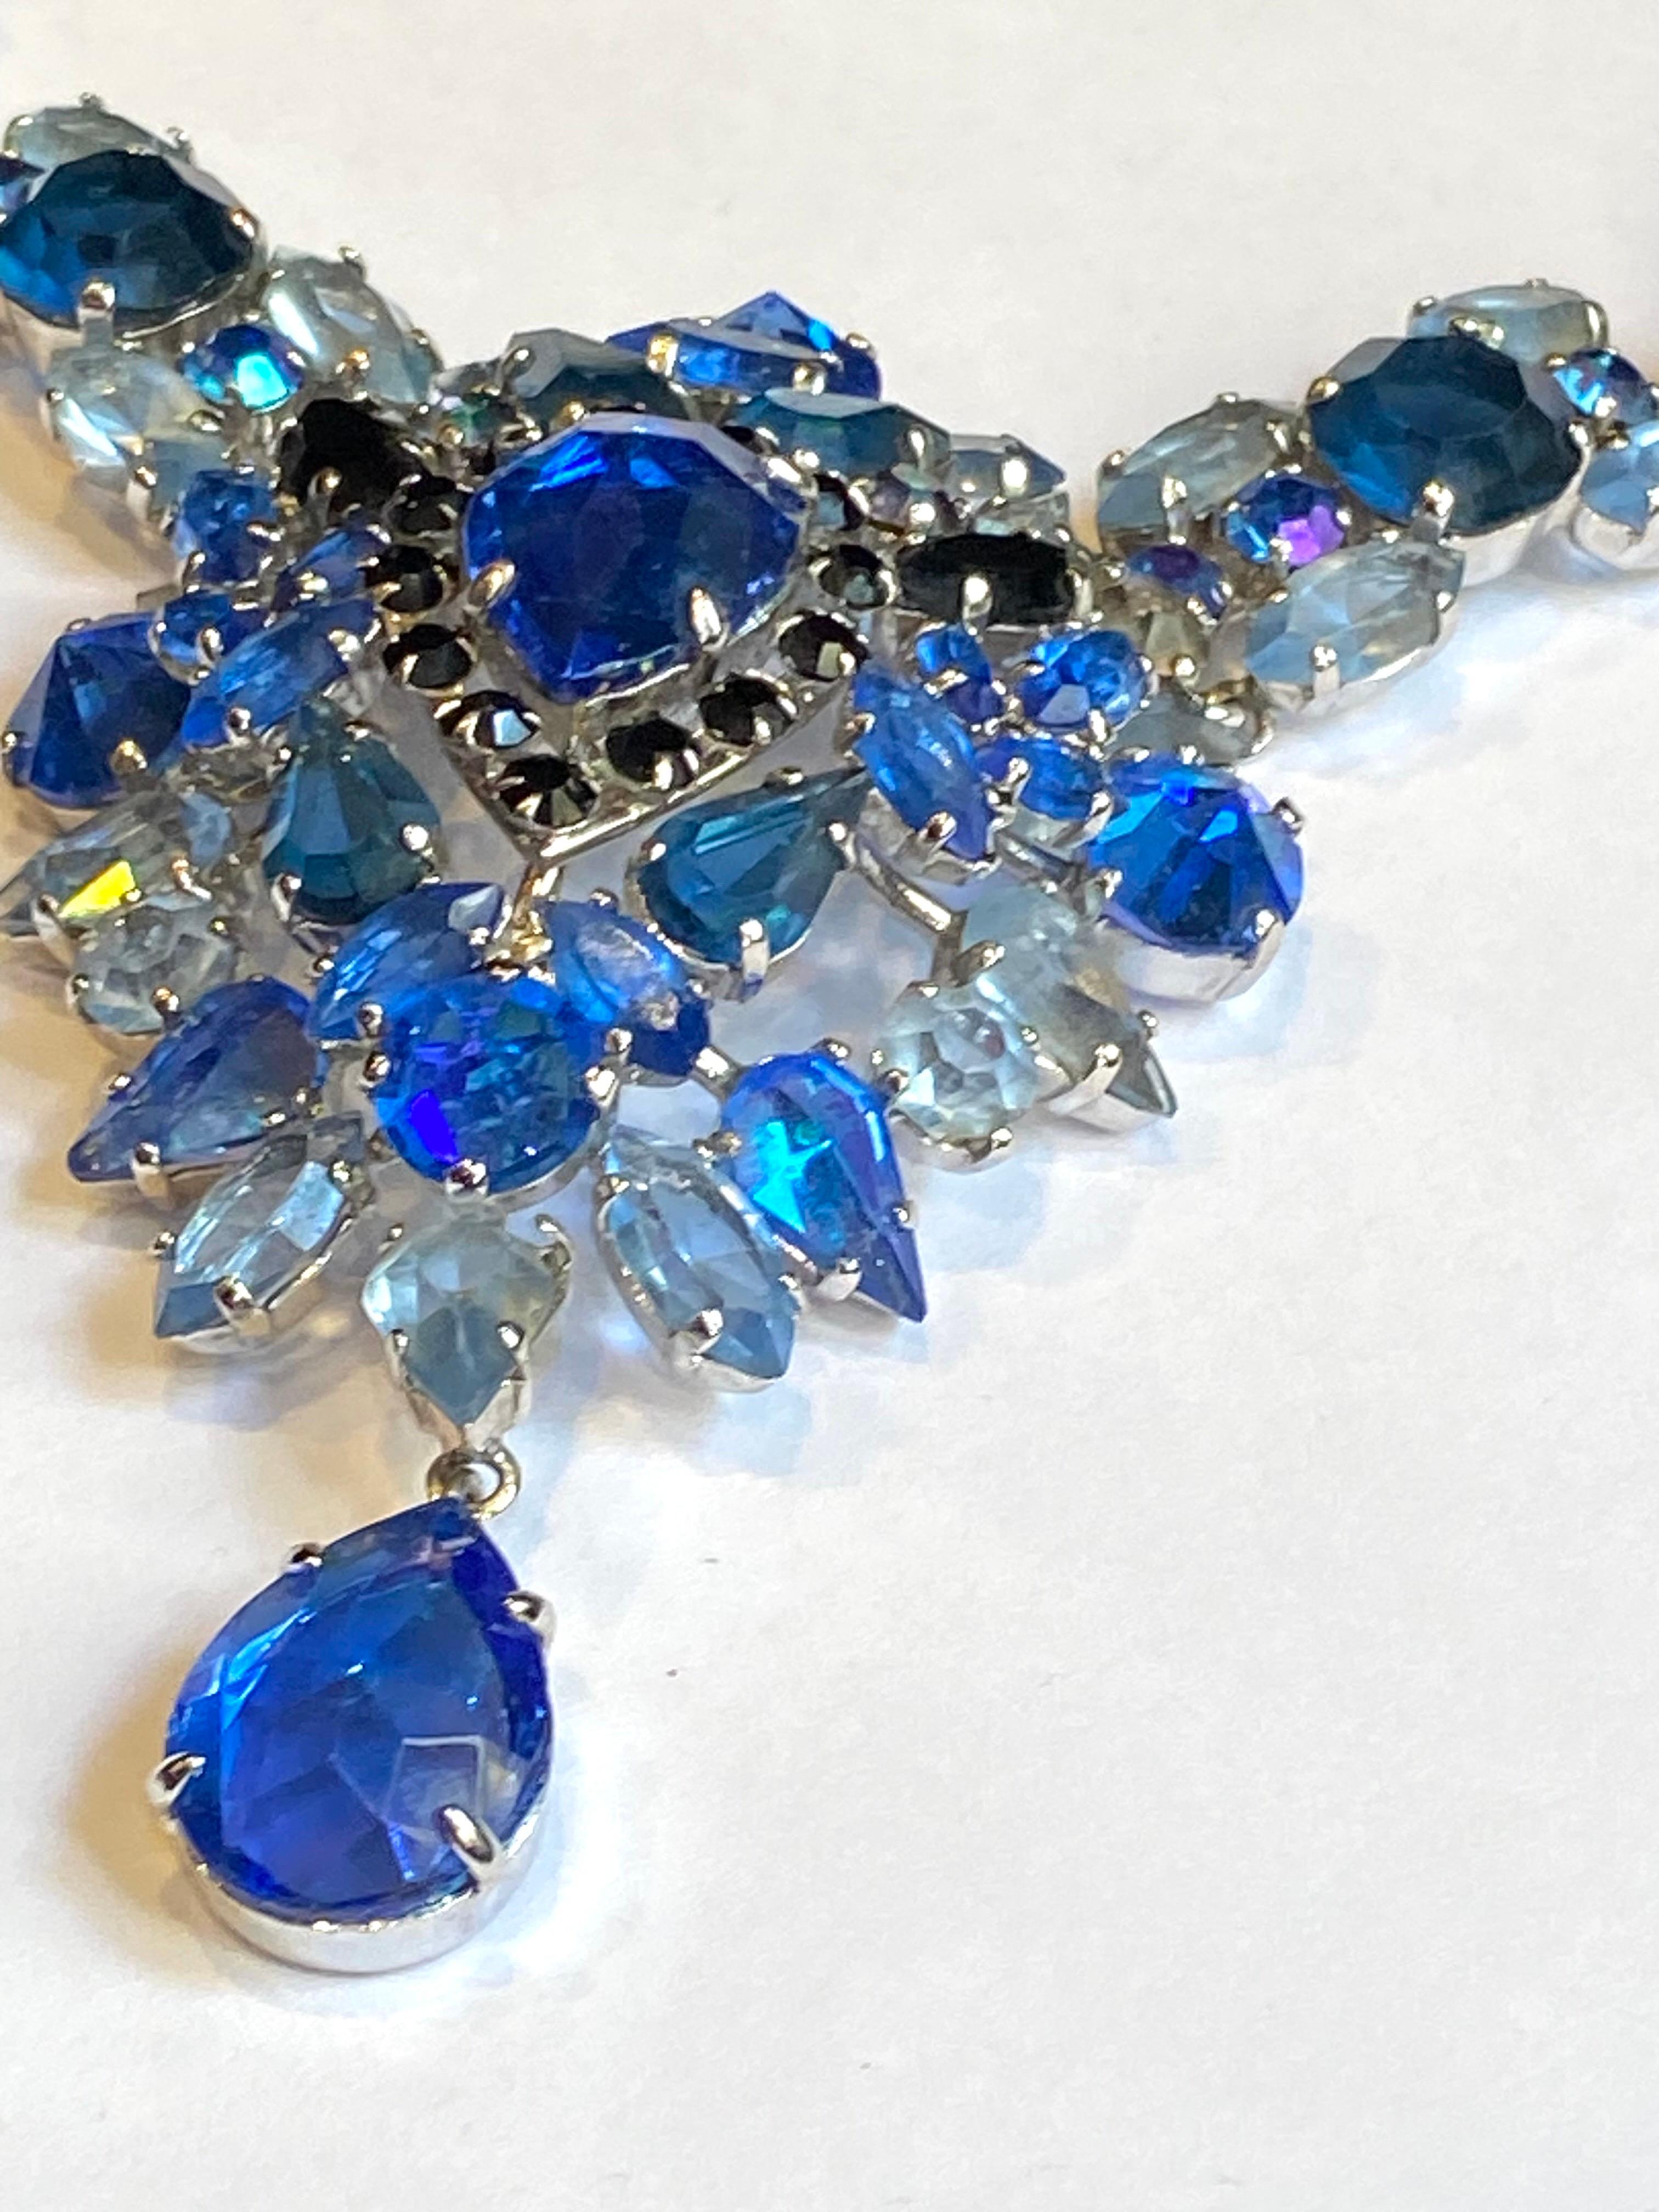 Christian Dior 1959 Shades of Blue Rhinestone Necklace by Henkel & Grosse' 3